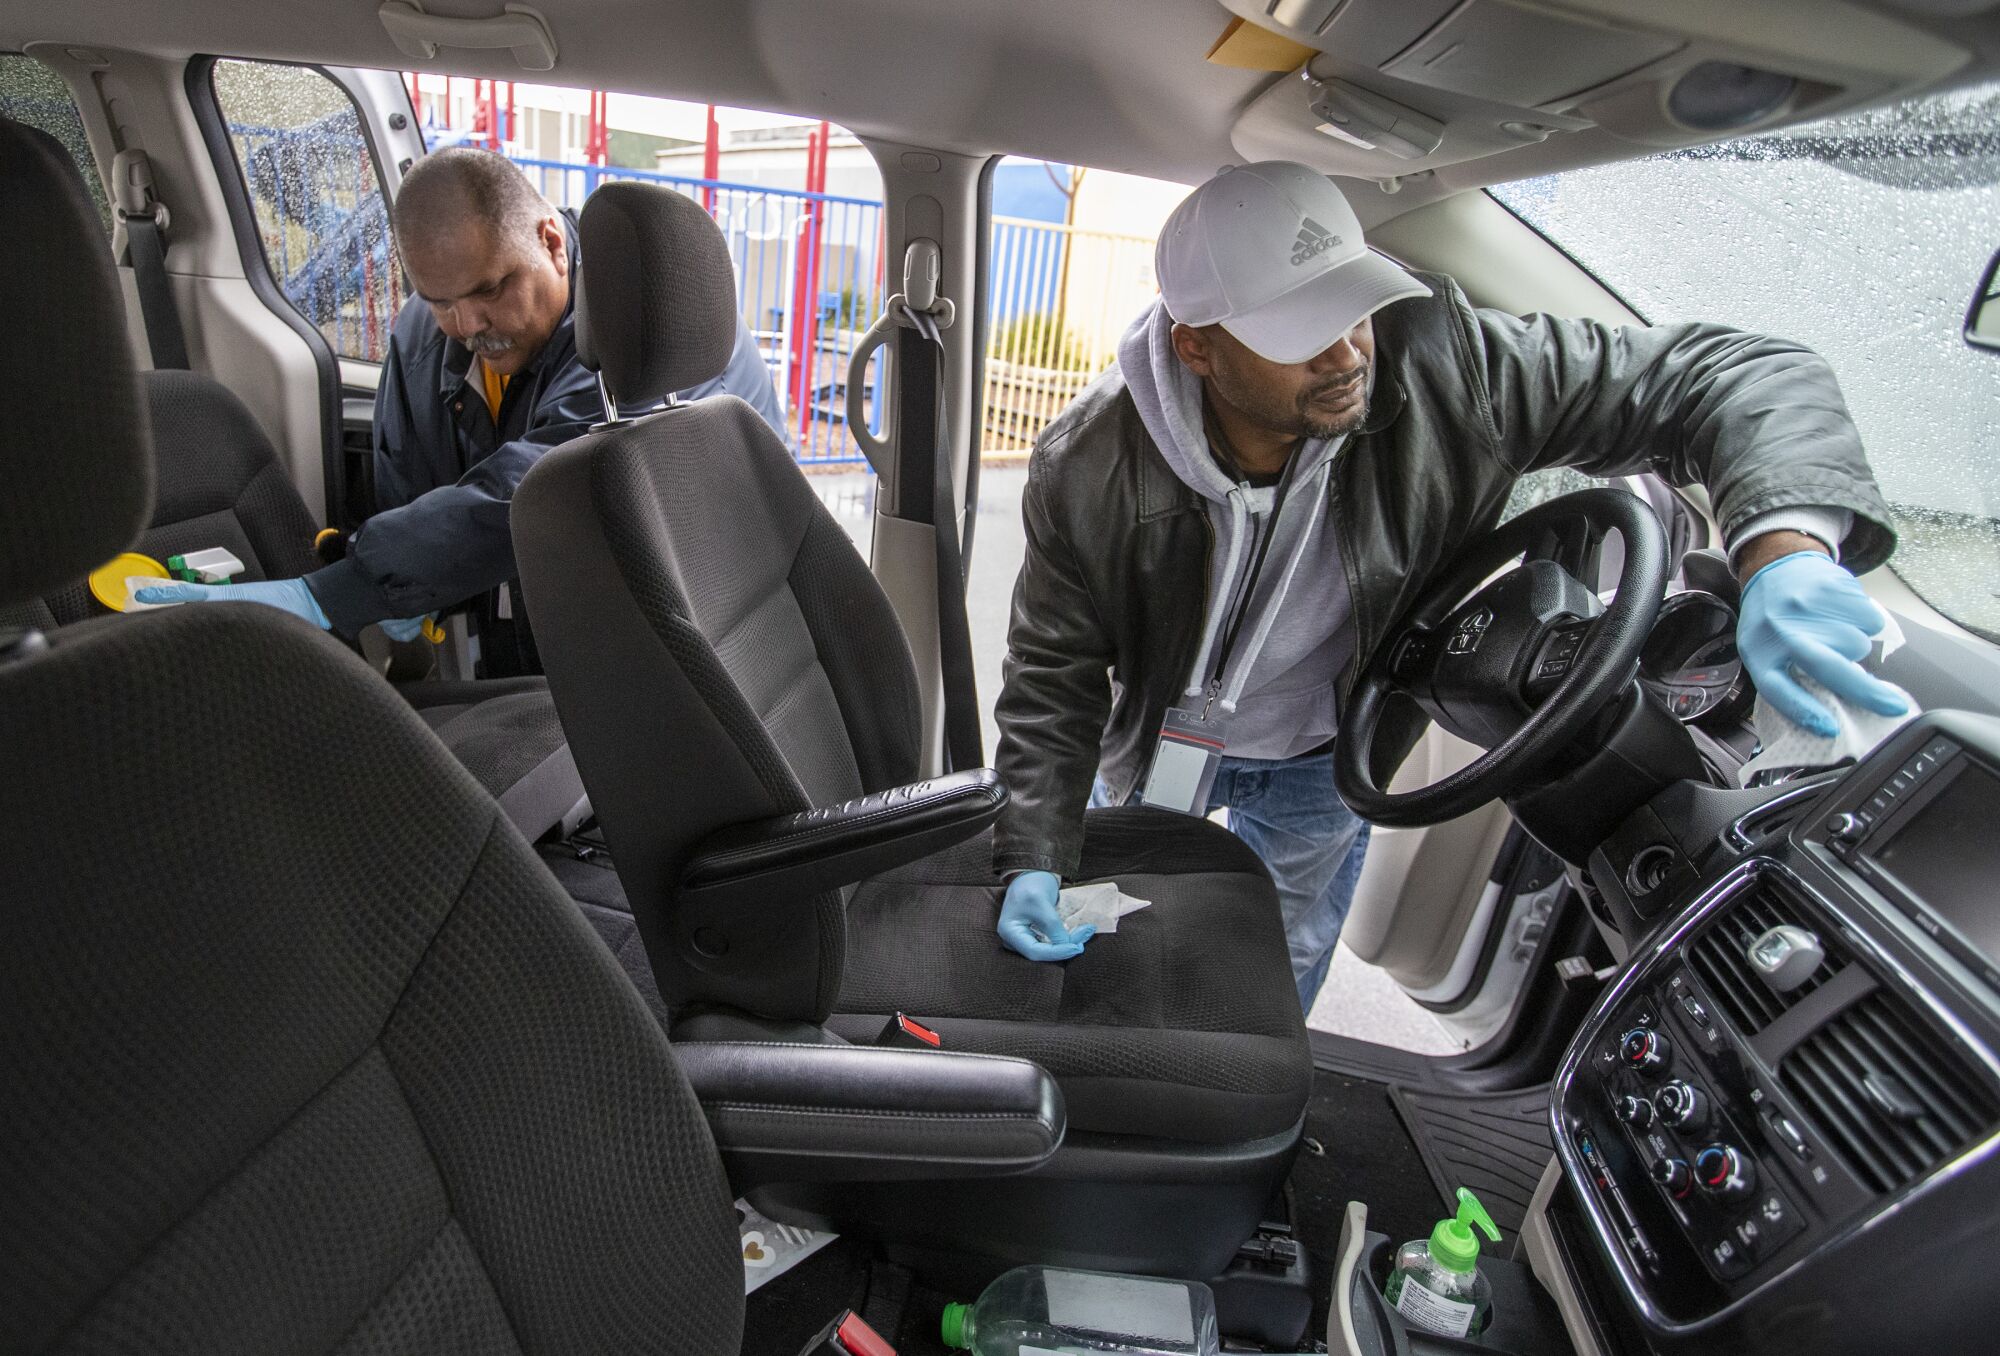 Outreach workers Ralph Gomez, left, and Kenya Smith sanitize their van before going out to look for homeless people as part of their program in Los Angeles.